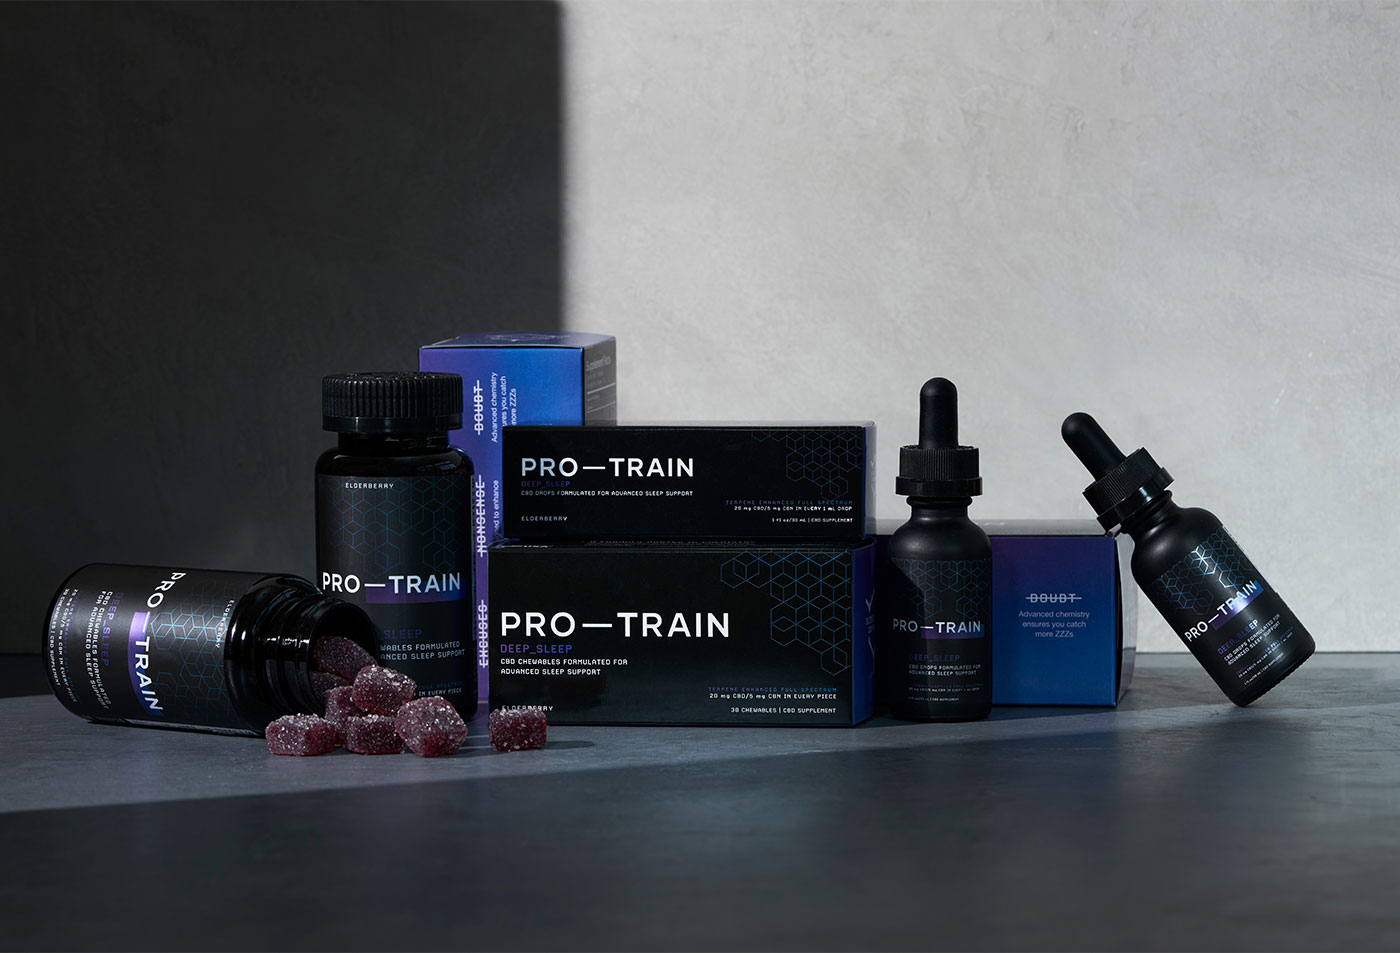 Pro-Train packaging design for the Deep Sleep line